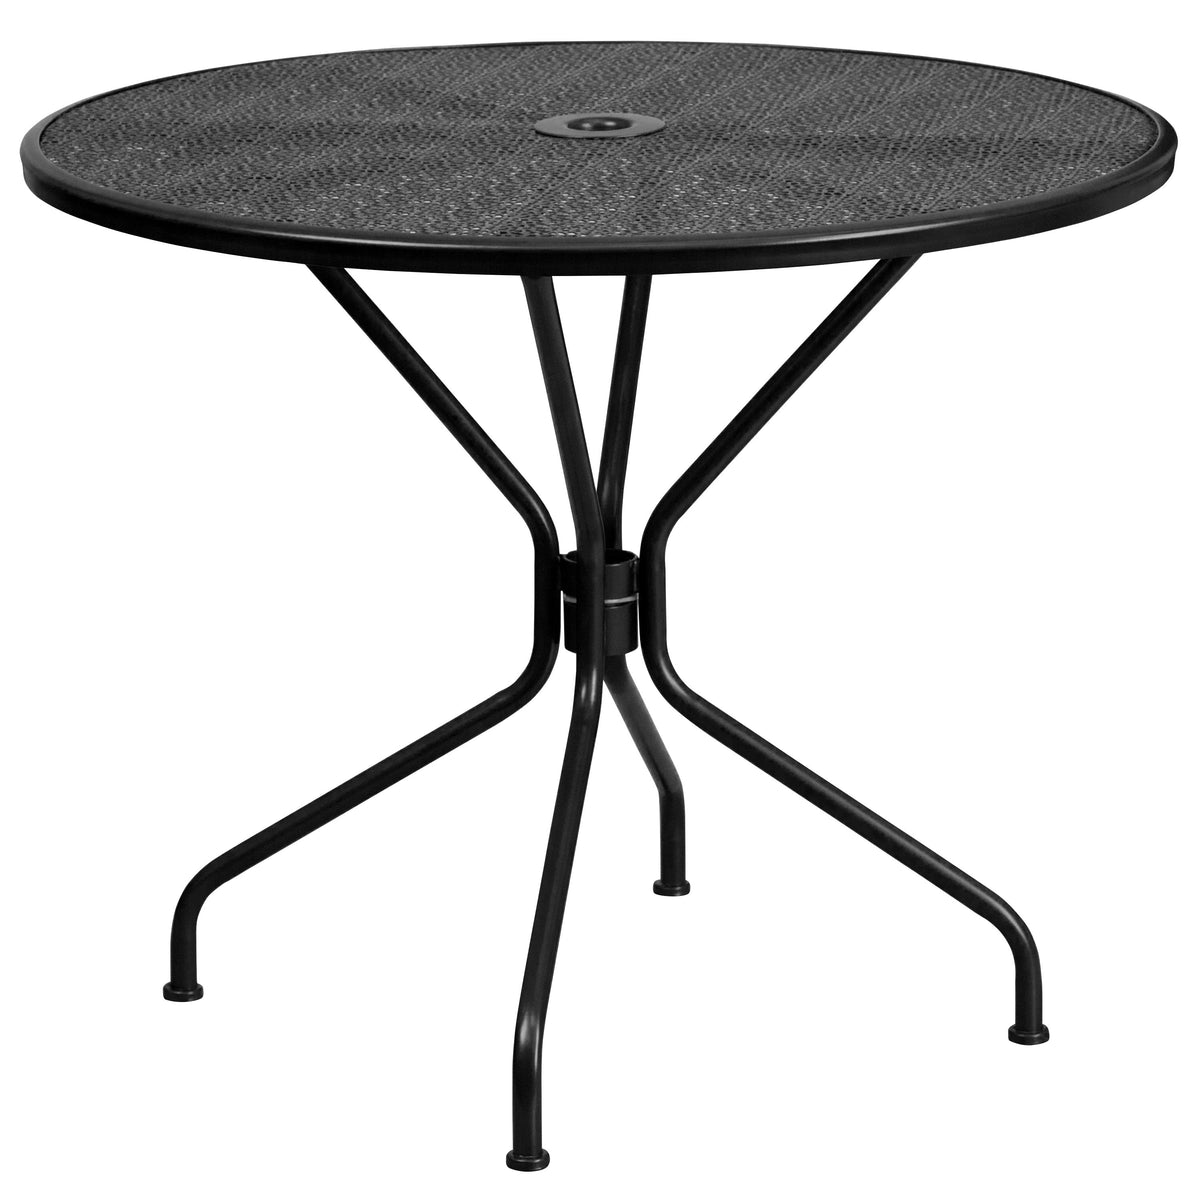 Black |#| 35.25inch Round Black Indoor-Outdoor Steel Patio Table Set w/ 4 Square Back Chairs